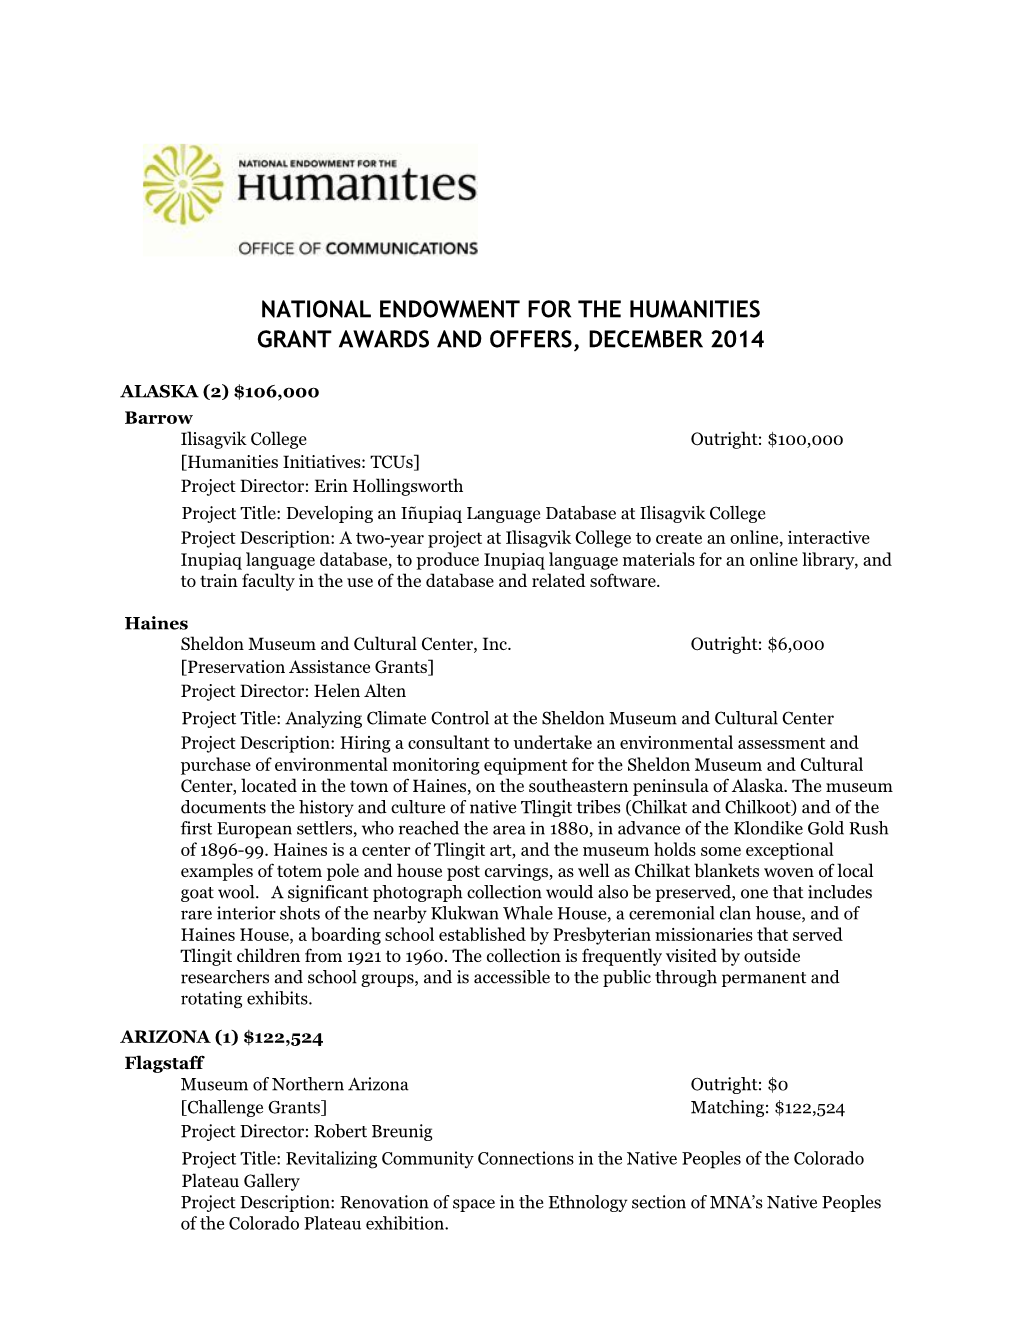 National Endowment for the Humanities Grant Awards and Offers, December 2014